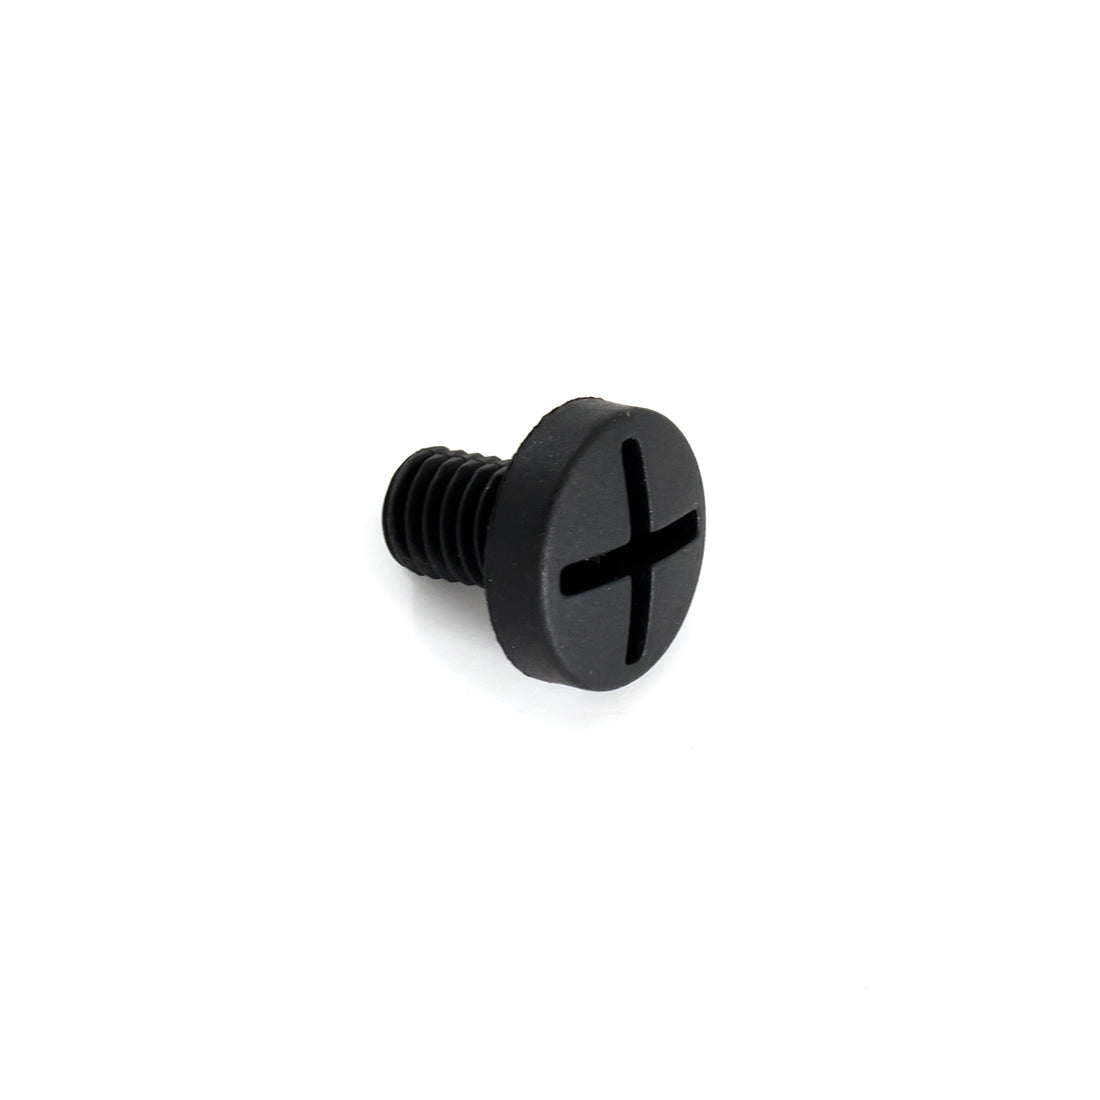 [MBA-000] Decoration screw - pair - (For Polisher)